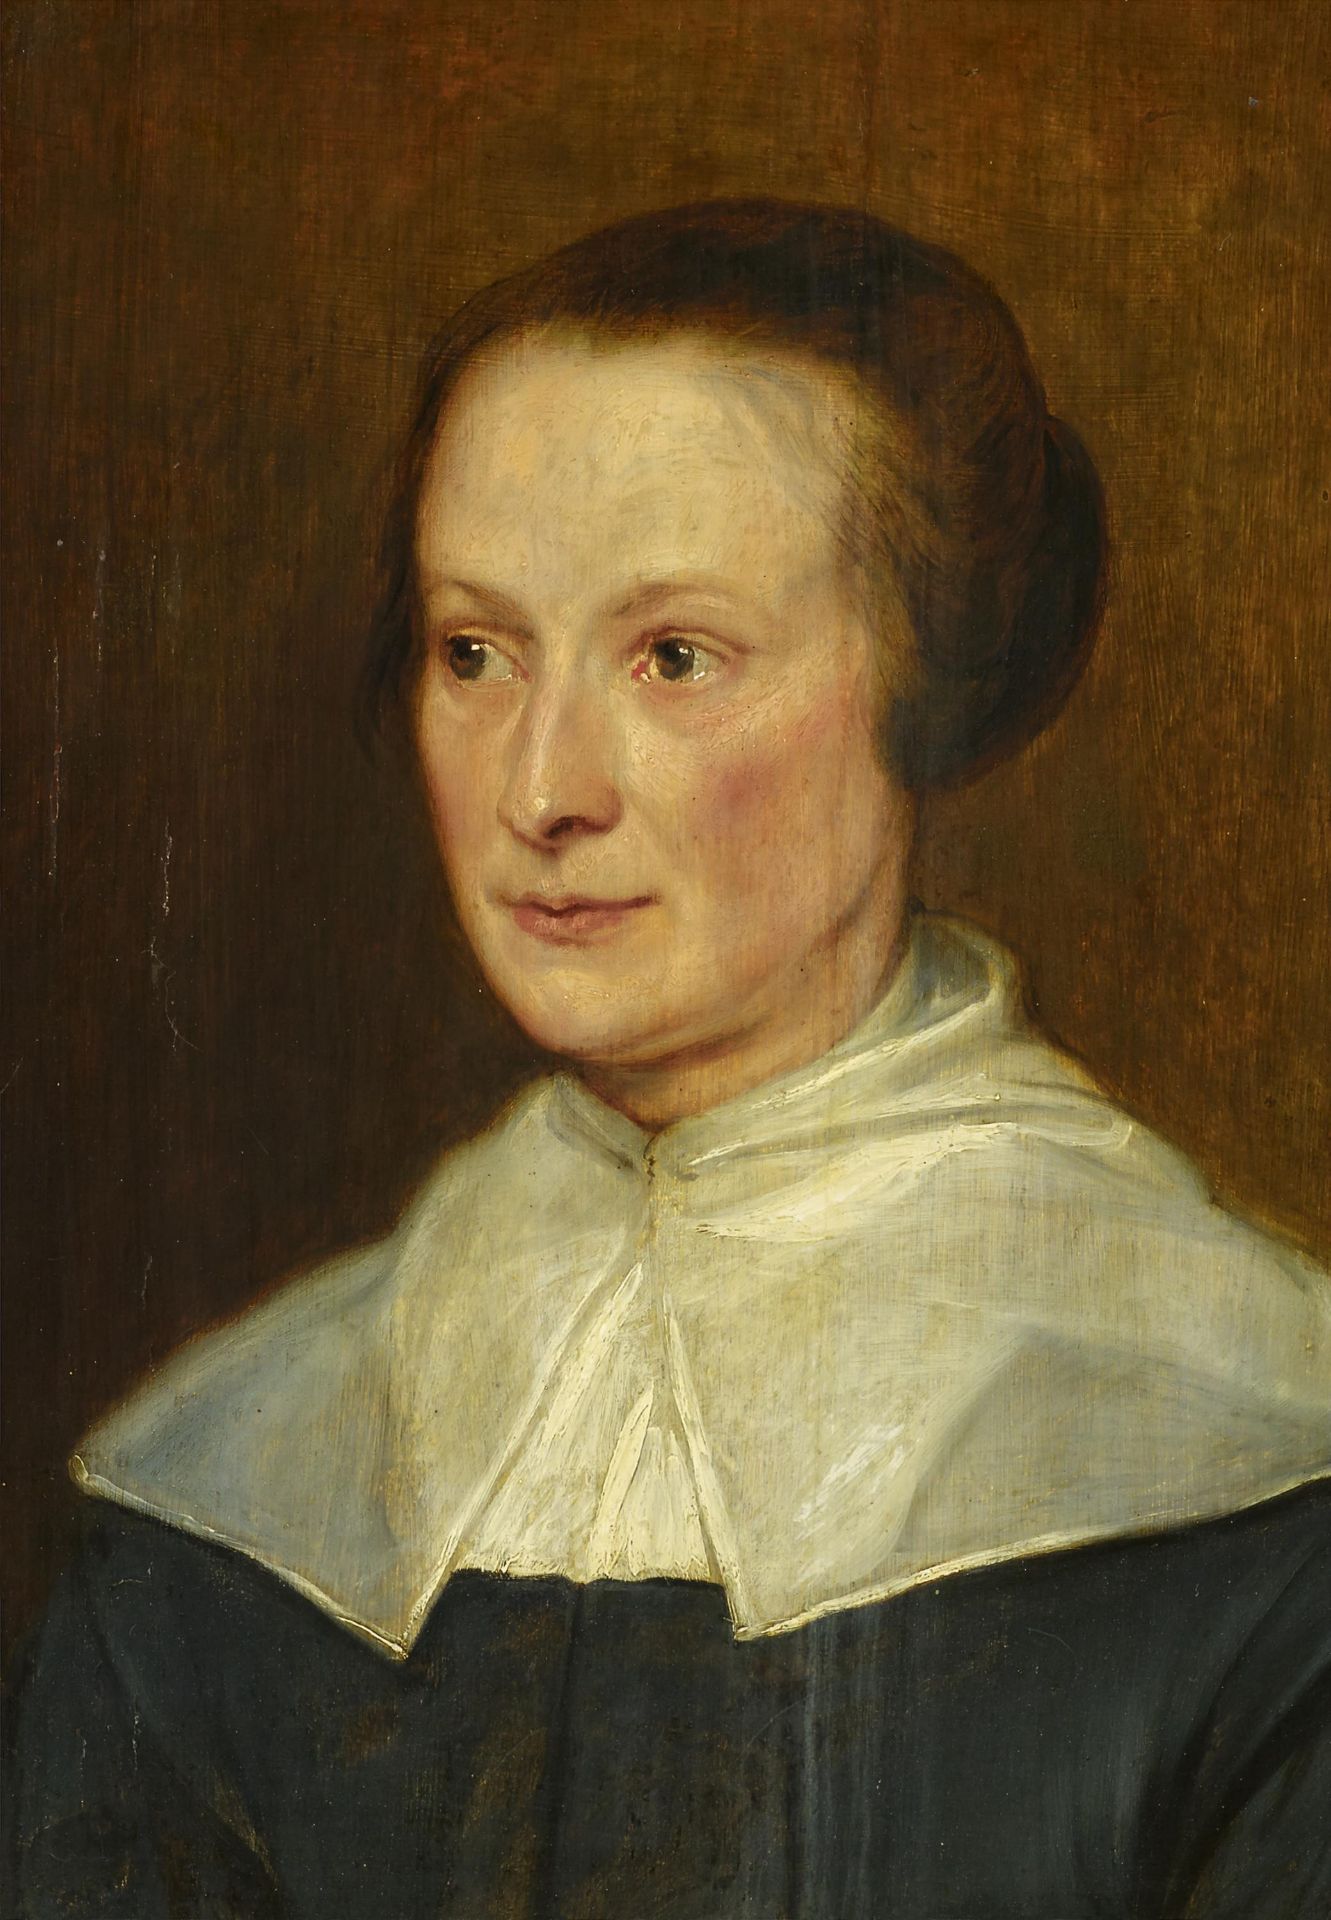 FLEMISH MASTERca. 1650Title: Portrait of a Lady. Technique: Oil on wood. Mounting: Parqueted.